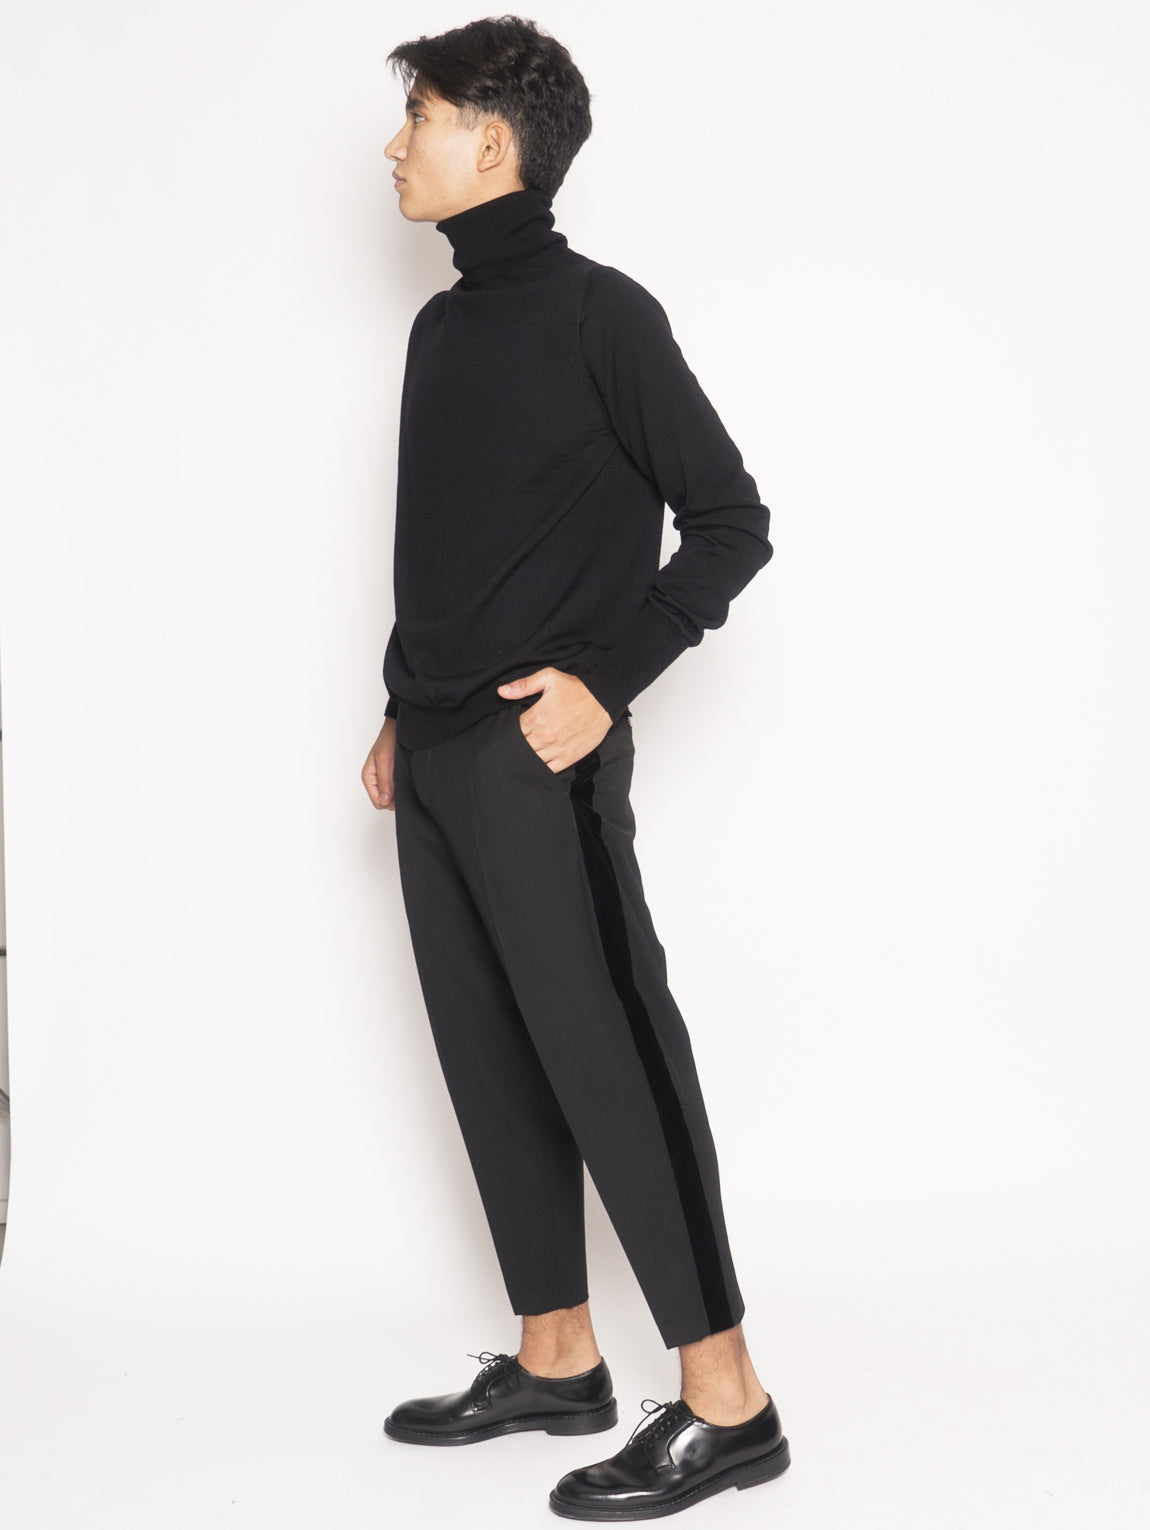 Forward trousers with black side band